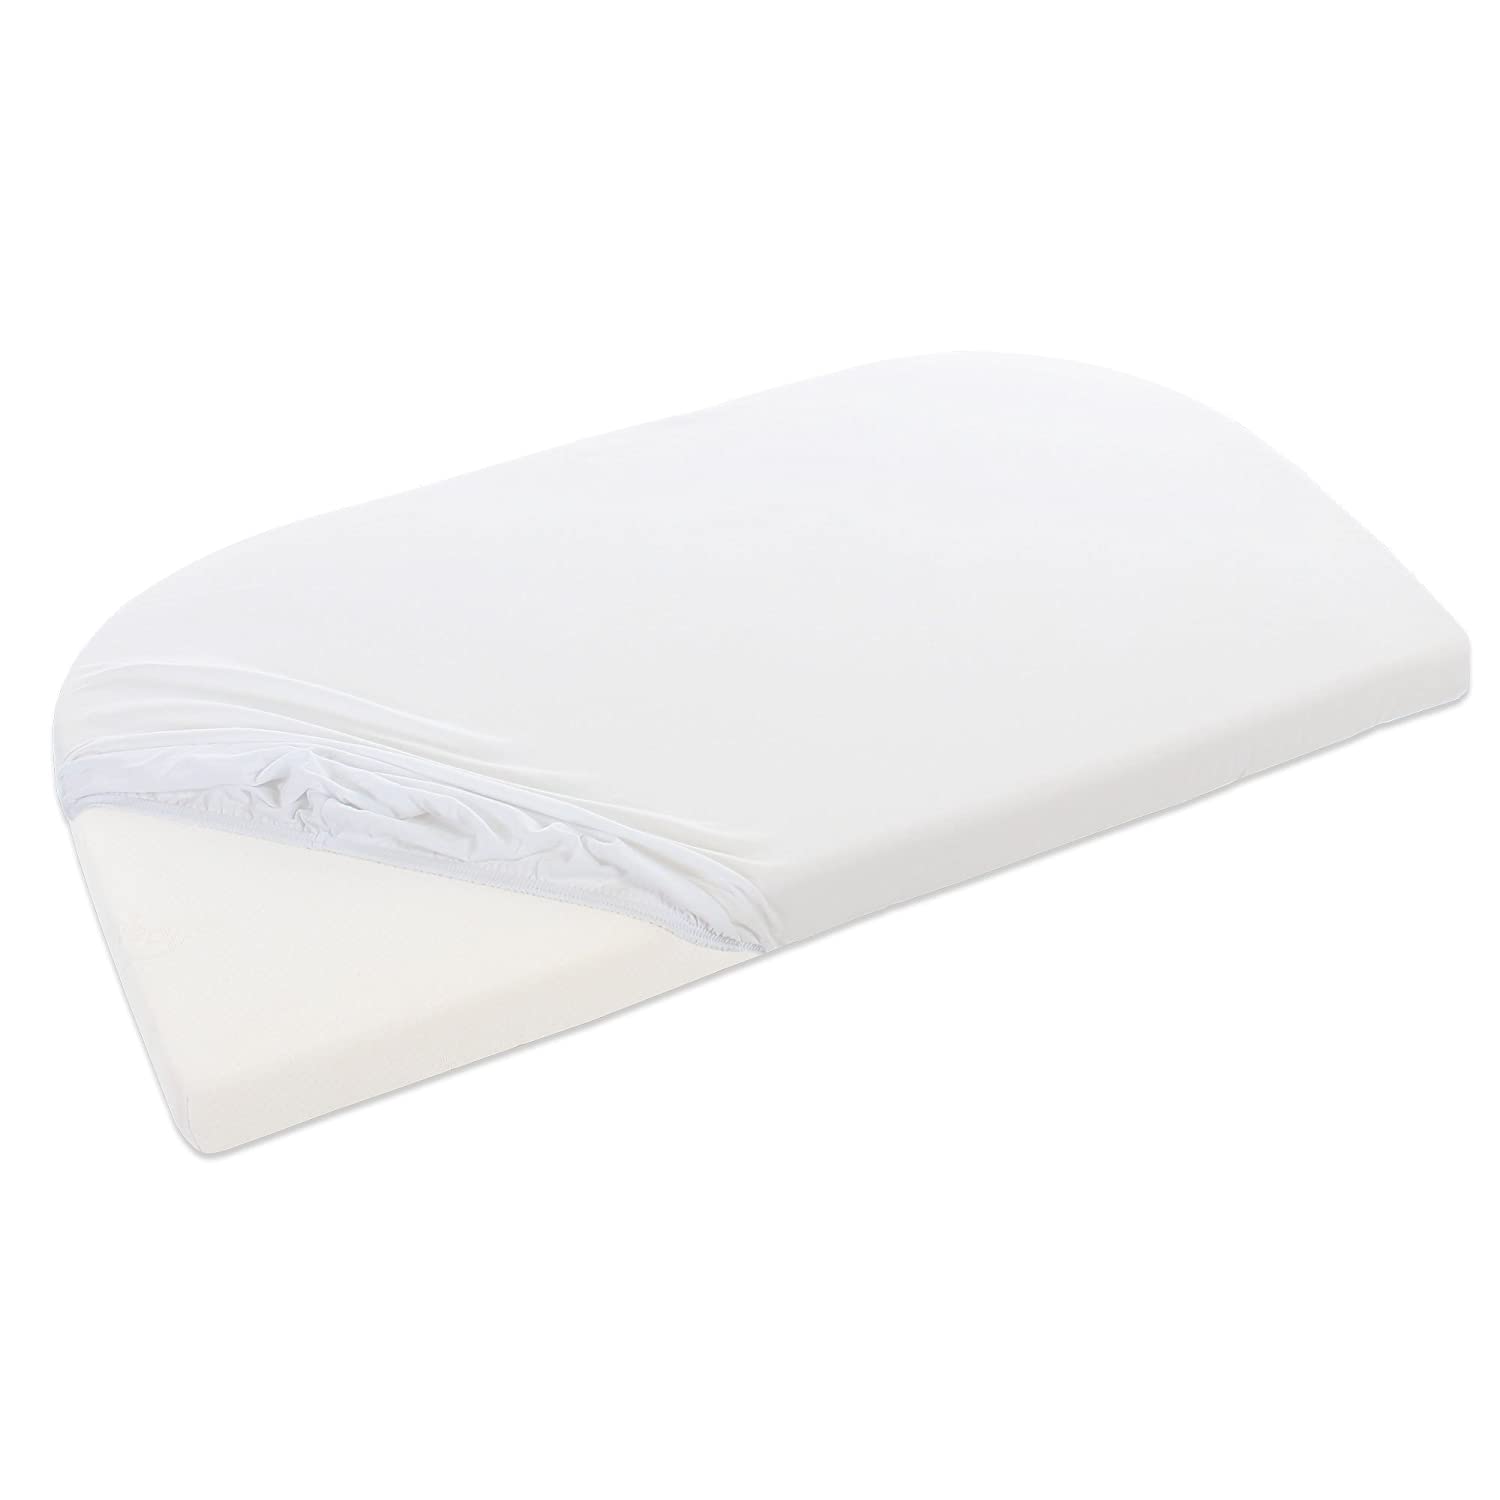 Babybay Jersey Fitted Sheet Deluxe Suitable For Original Model, Off-White, 